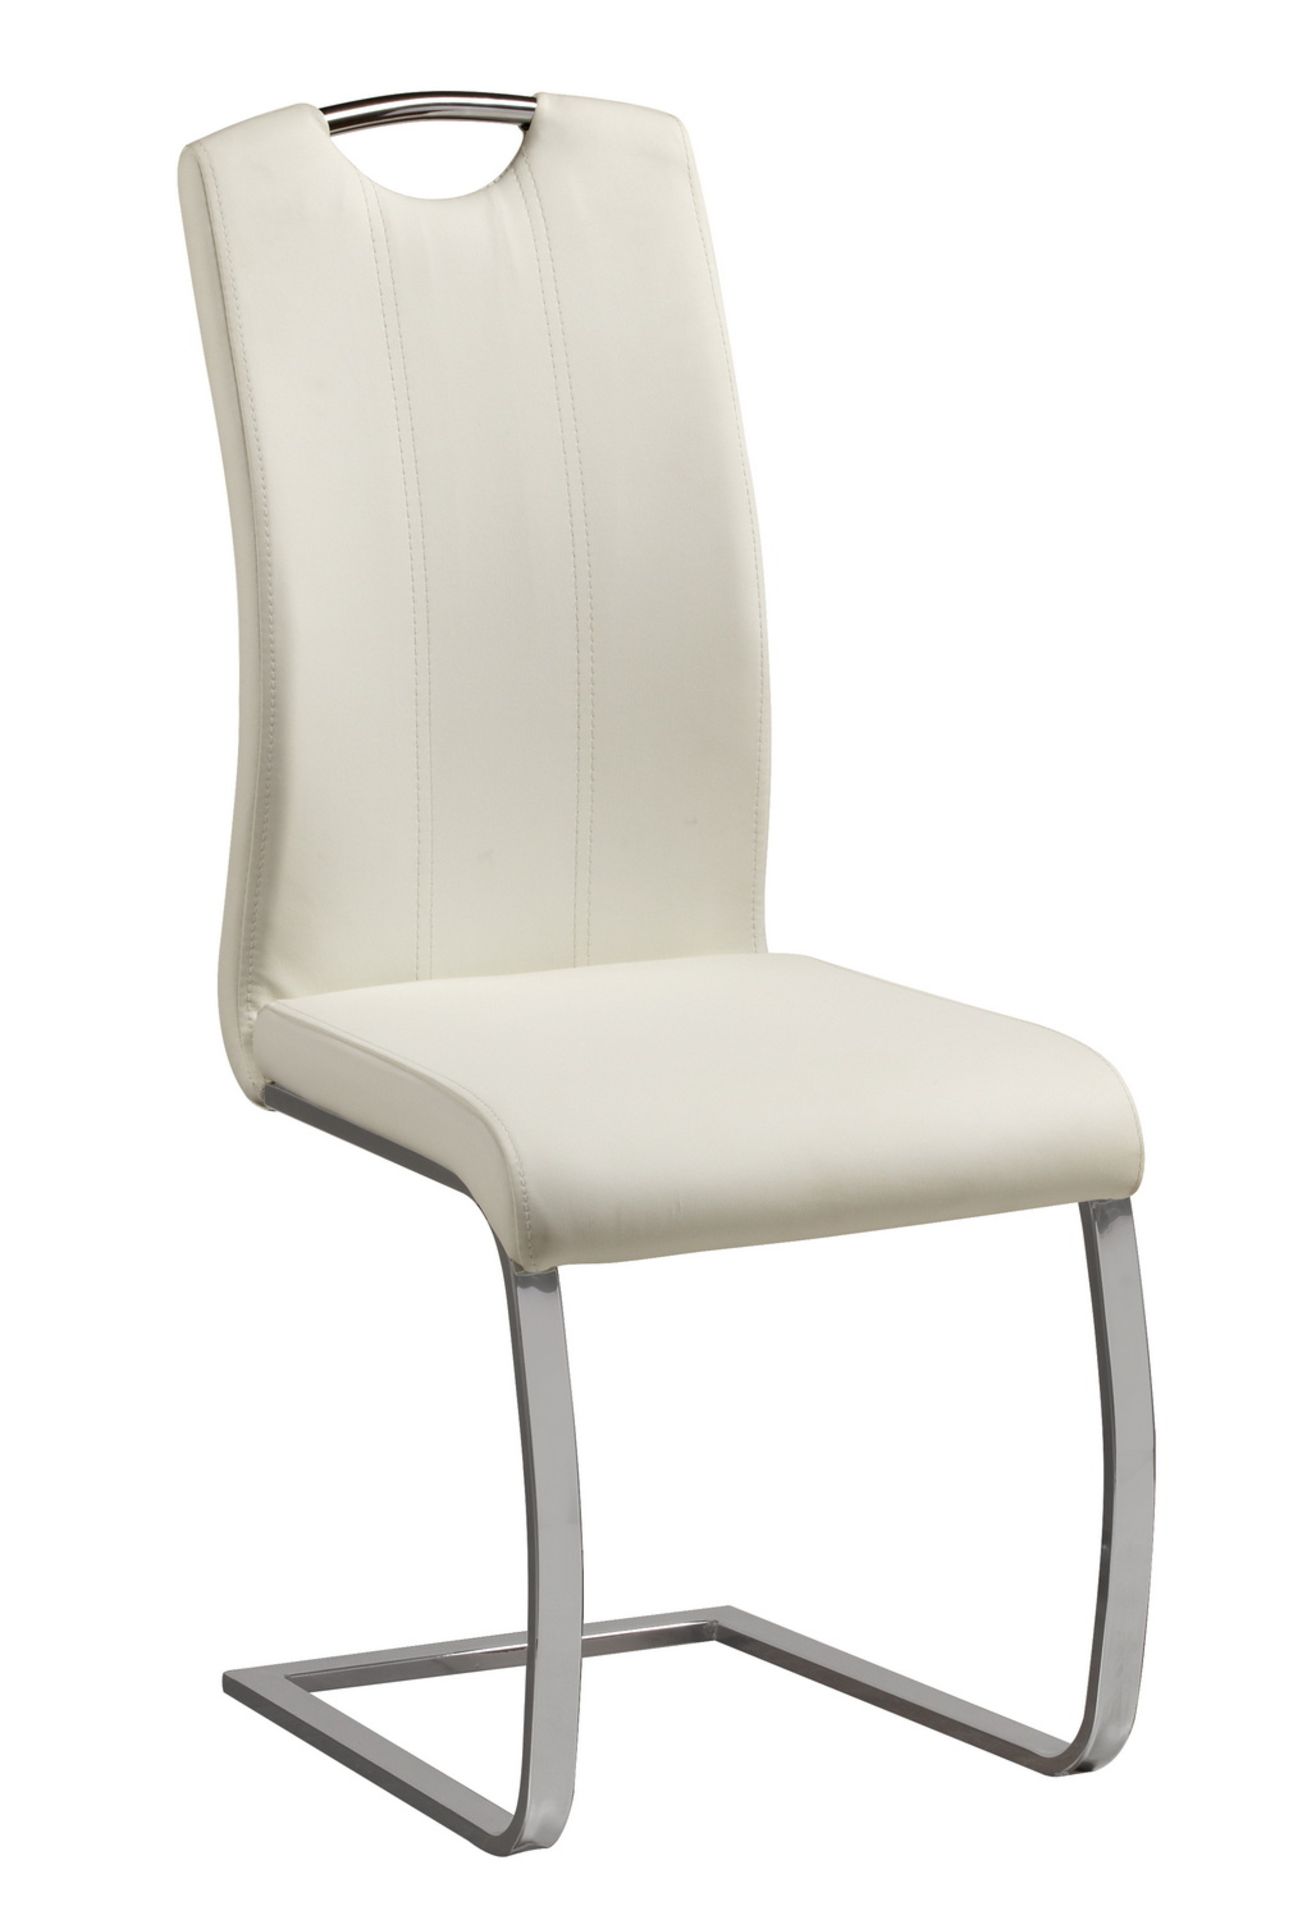 UNITS - WHITE PU LEATHER W/ CHROME BASE DINING CHAIRS (85-4CHWH) (IN BOX)